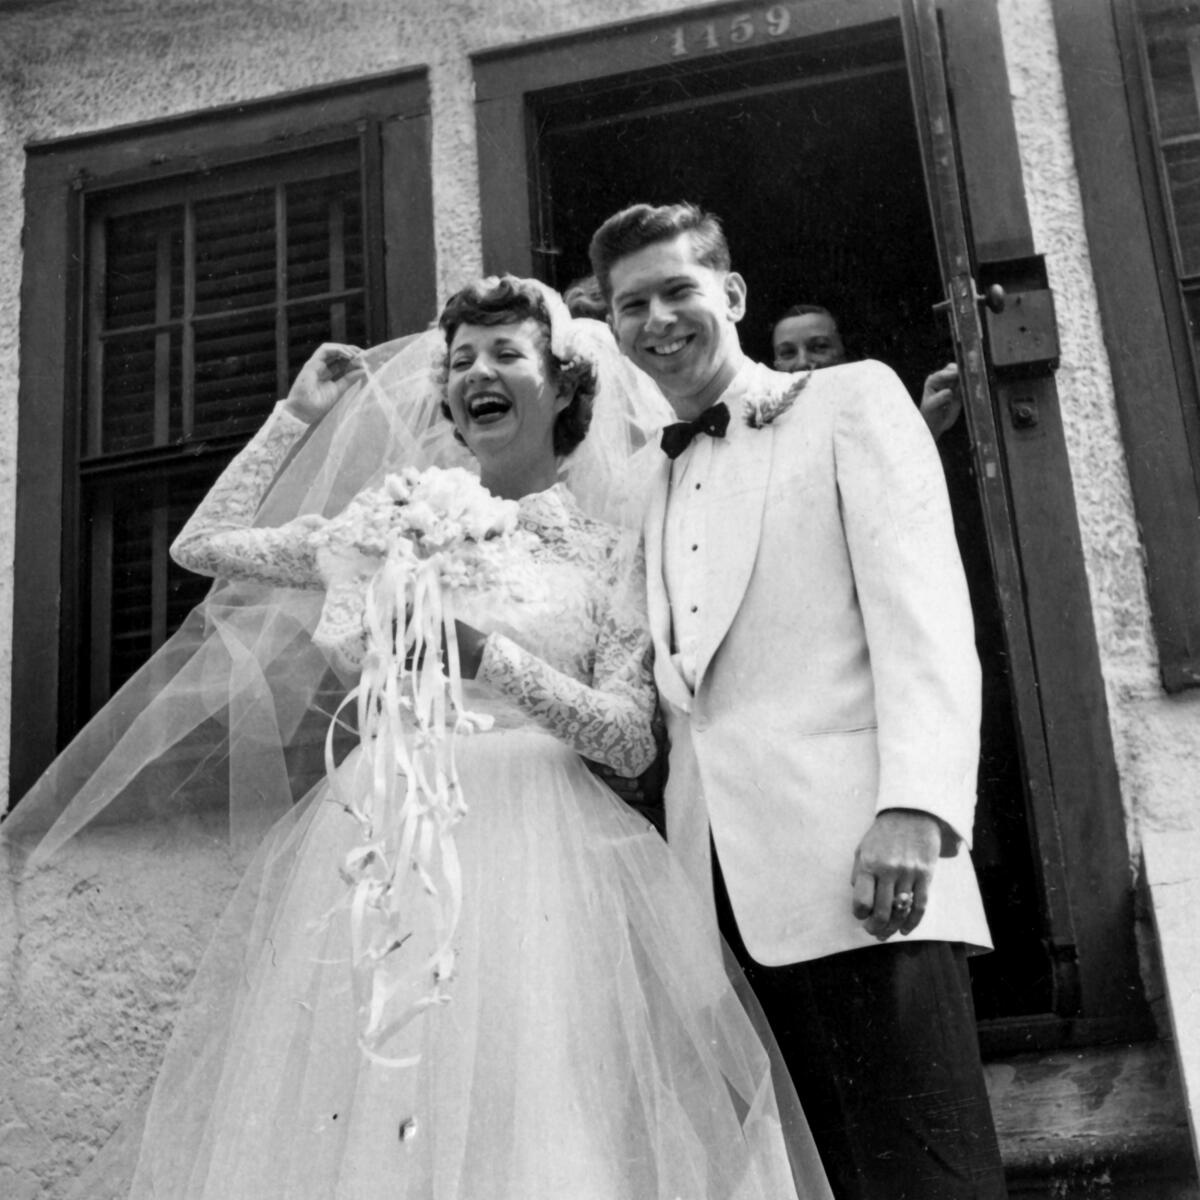 A black-and-white photo of a bride, left, and a groom